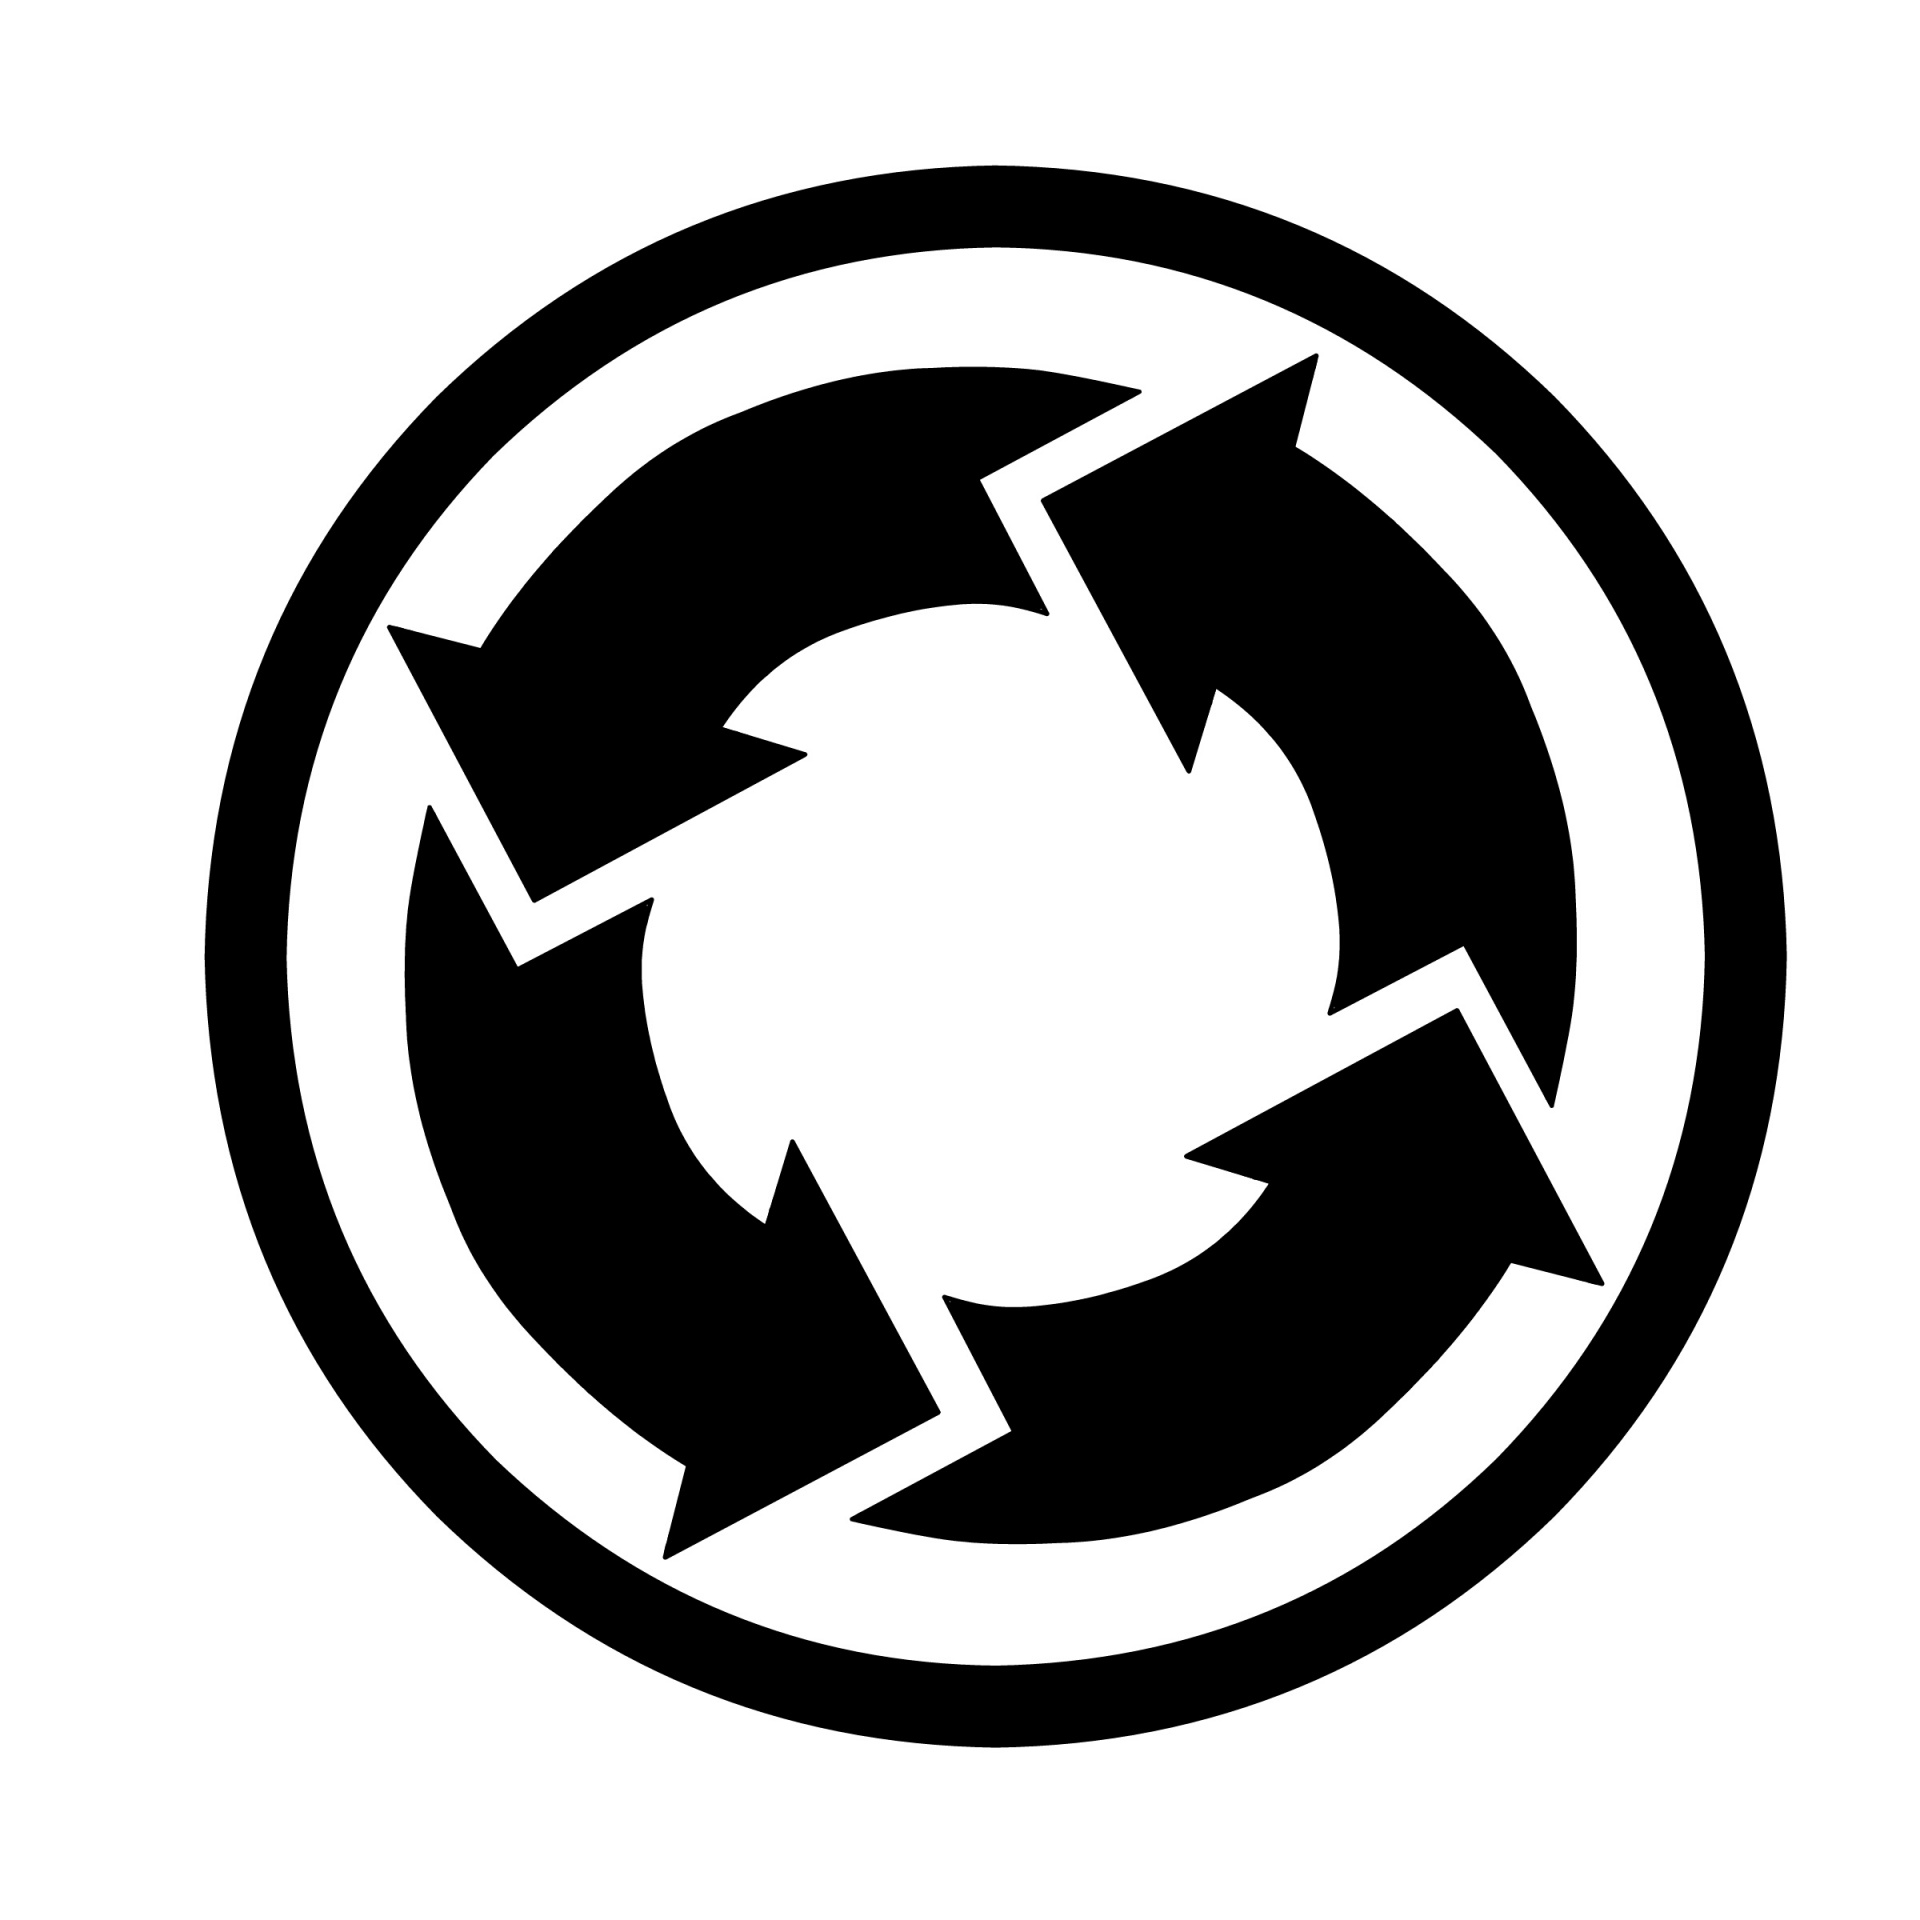 arrows, synchronize, update, circular, circulation, clear, cycle, delete, icon, element, discard, exchange, loop, motion, recyclable, recycle, refresh, reload, renew, repeat, reset, revolve, rotate, spin, sync,